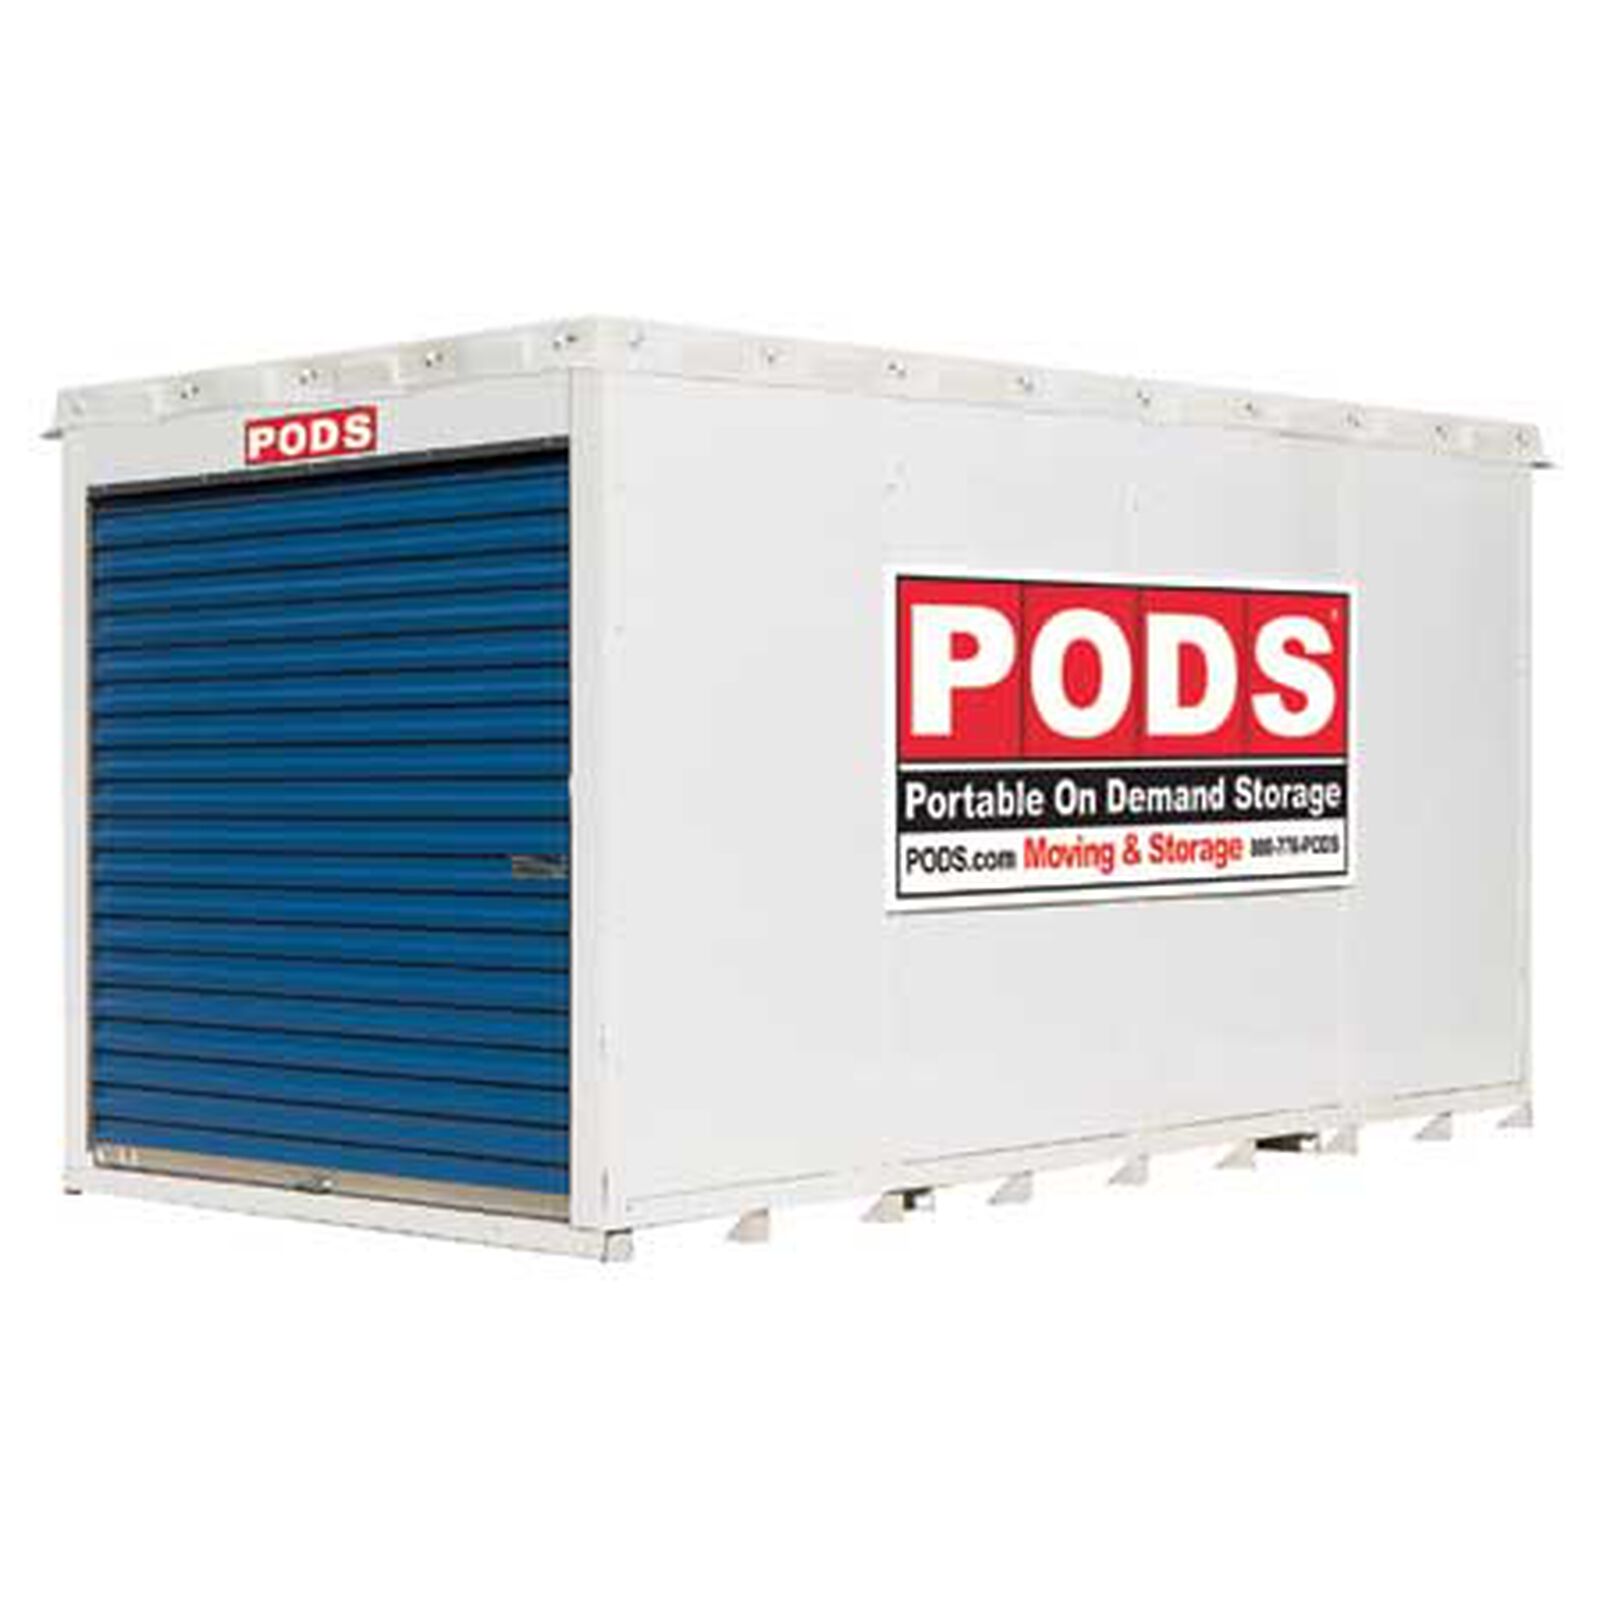 HO Moving & Storage Container, PODS